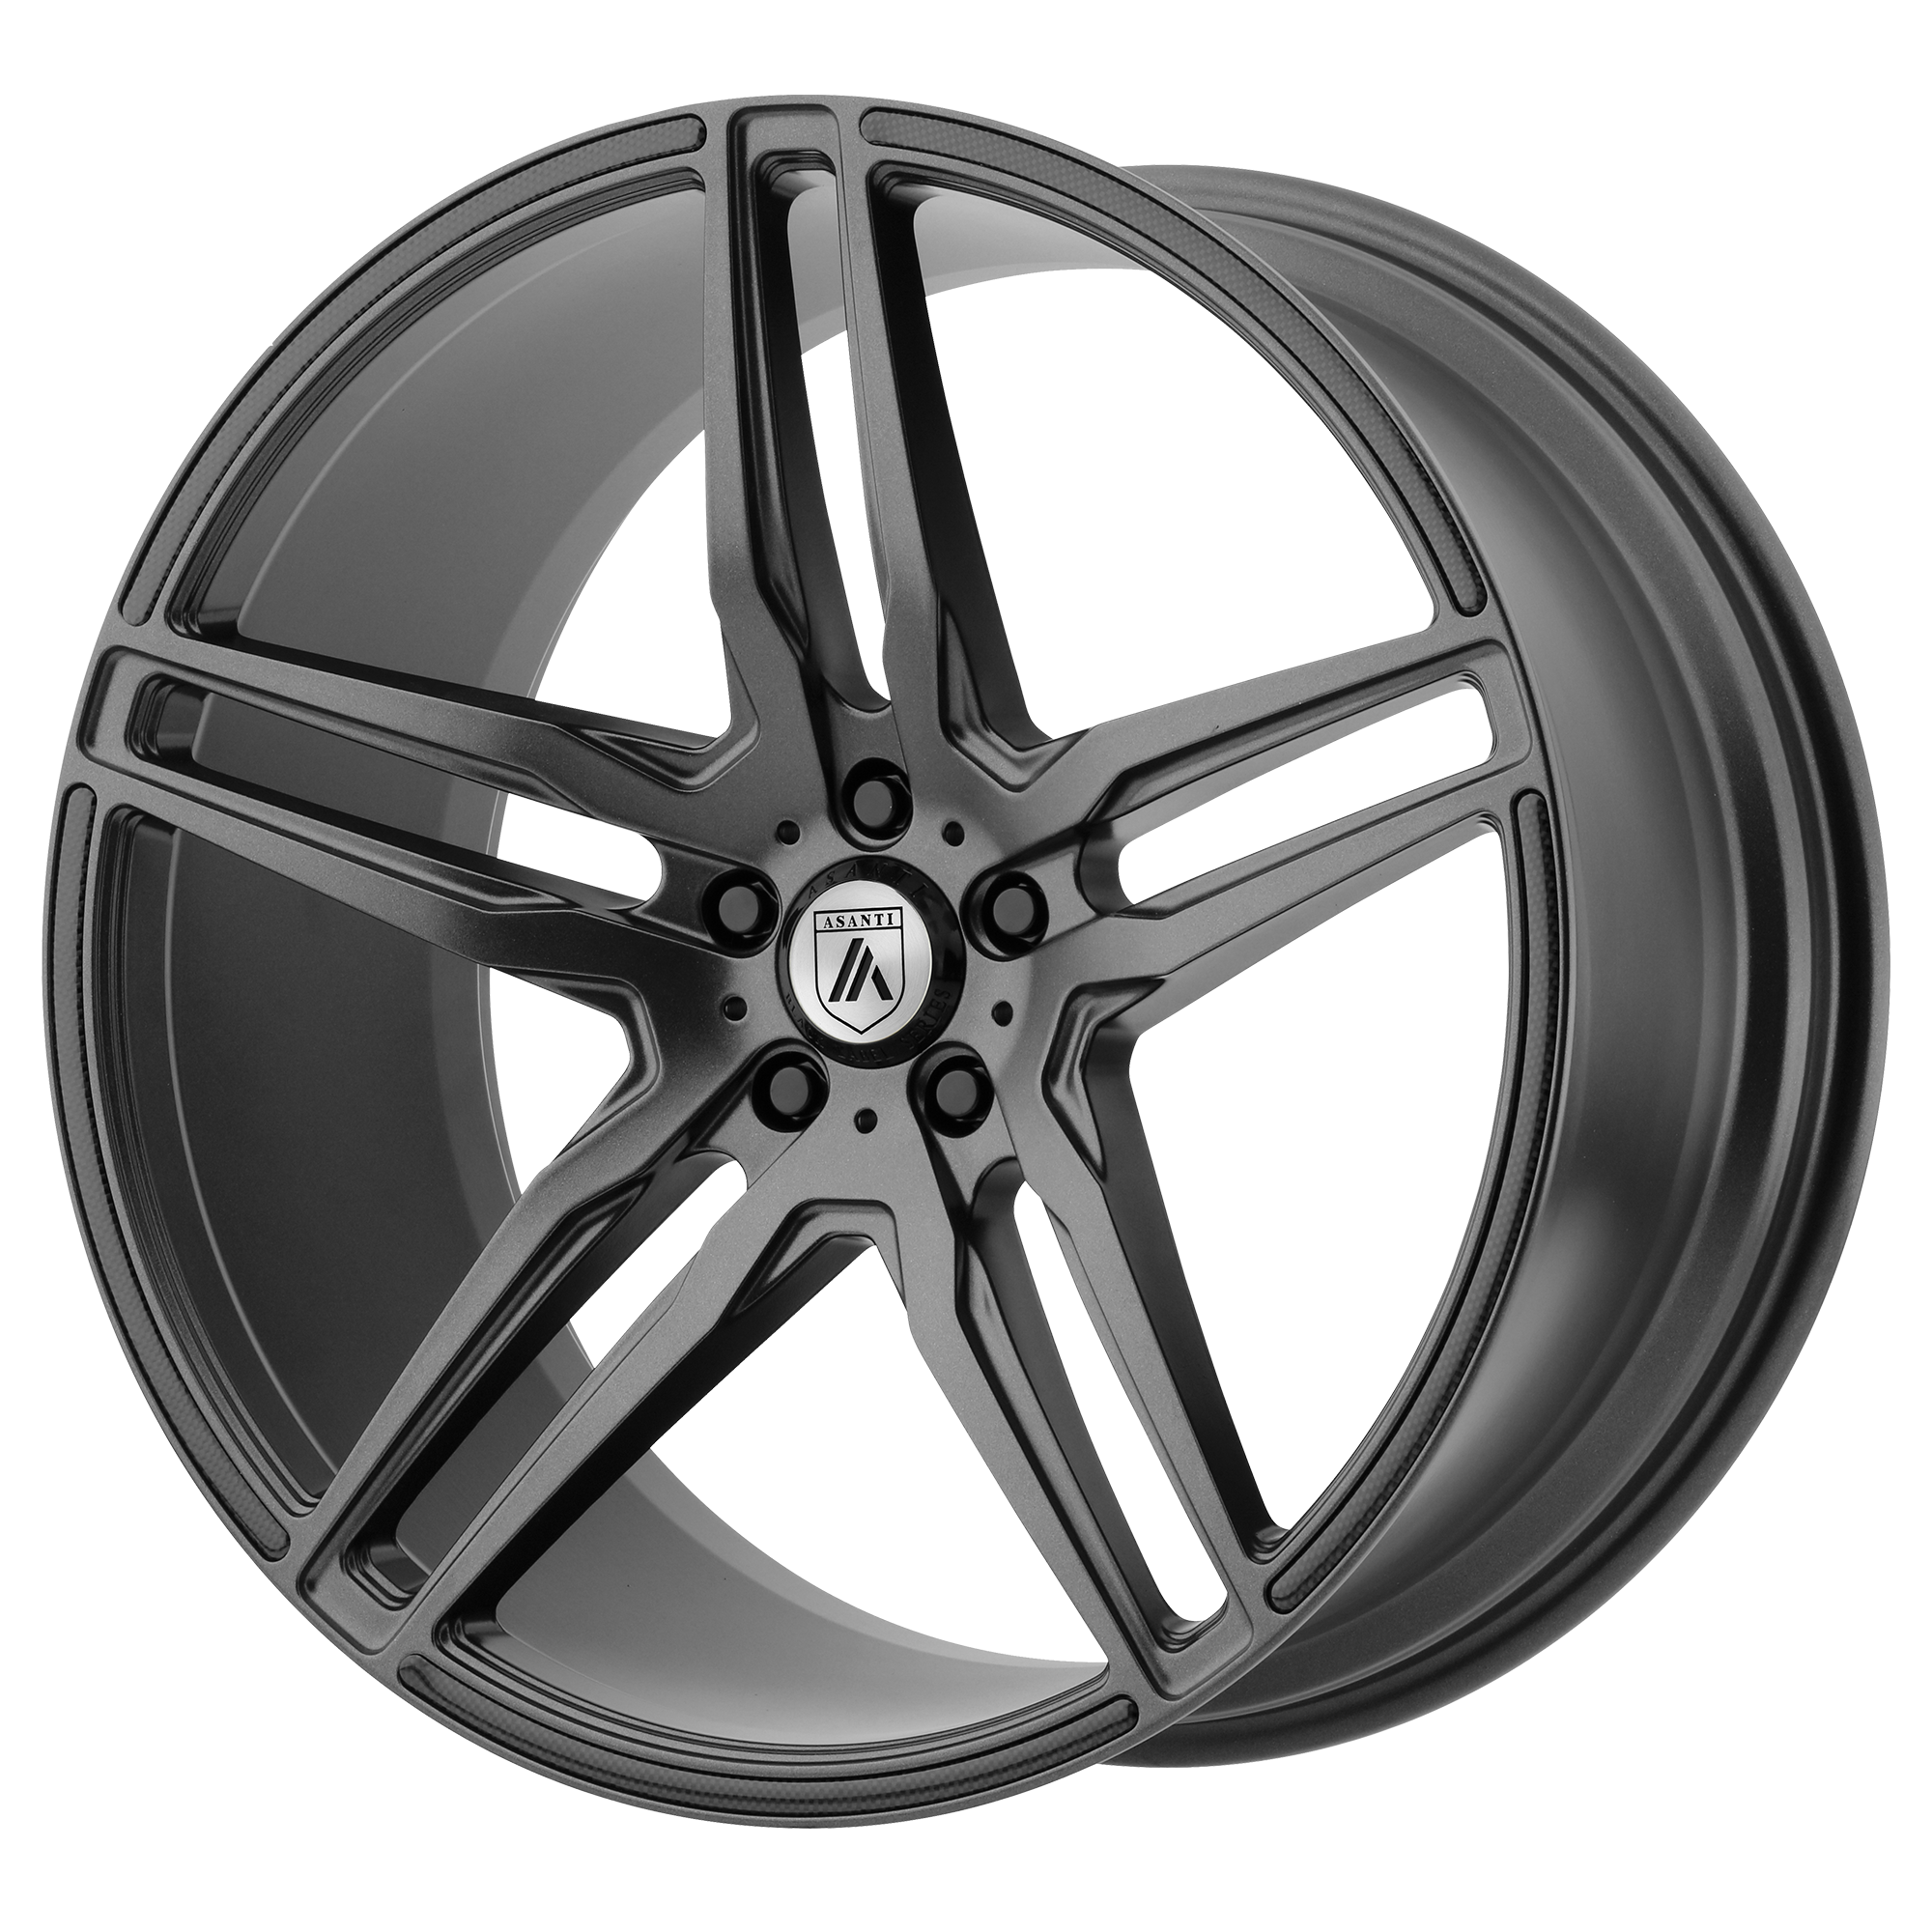 ORION 20x10.5 5x120.00 MATTE GRAPHITE (38 mm) - Tires and Engine Performance